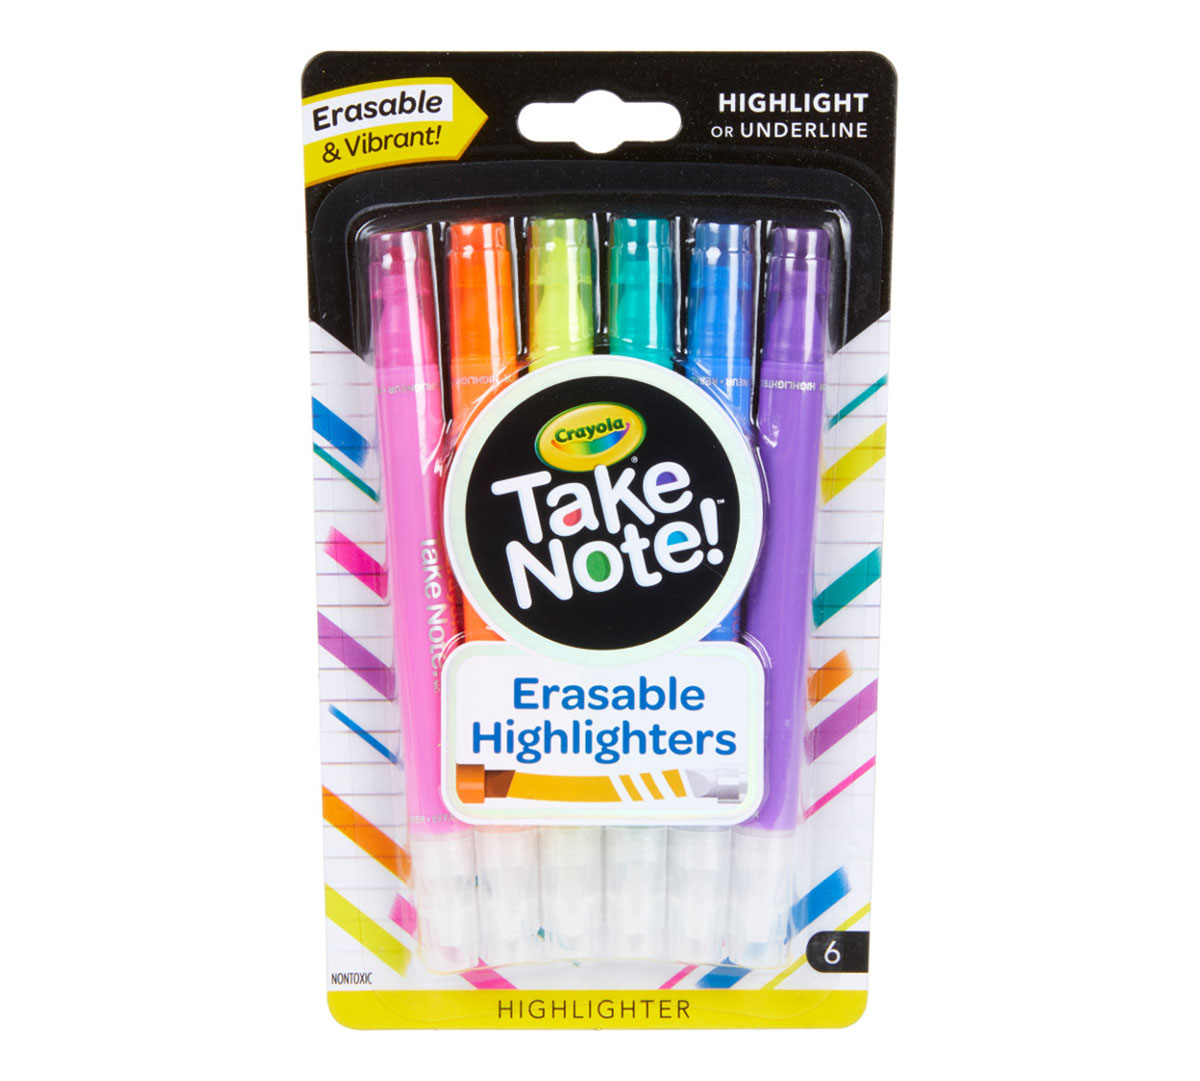 American Crafts™ White Erasable Chalk Markers, 2ct.